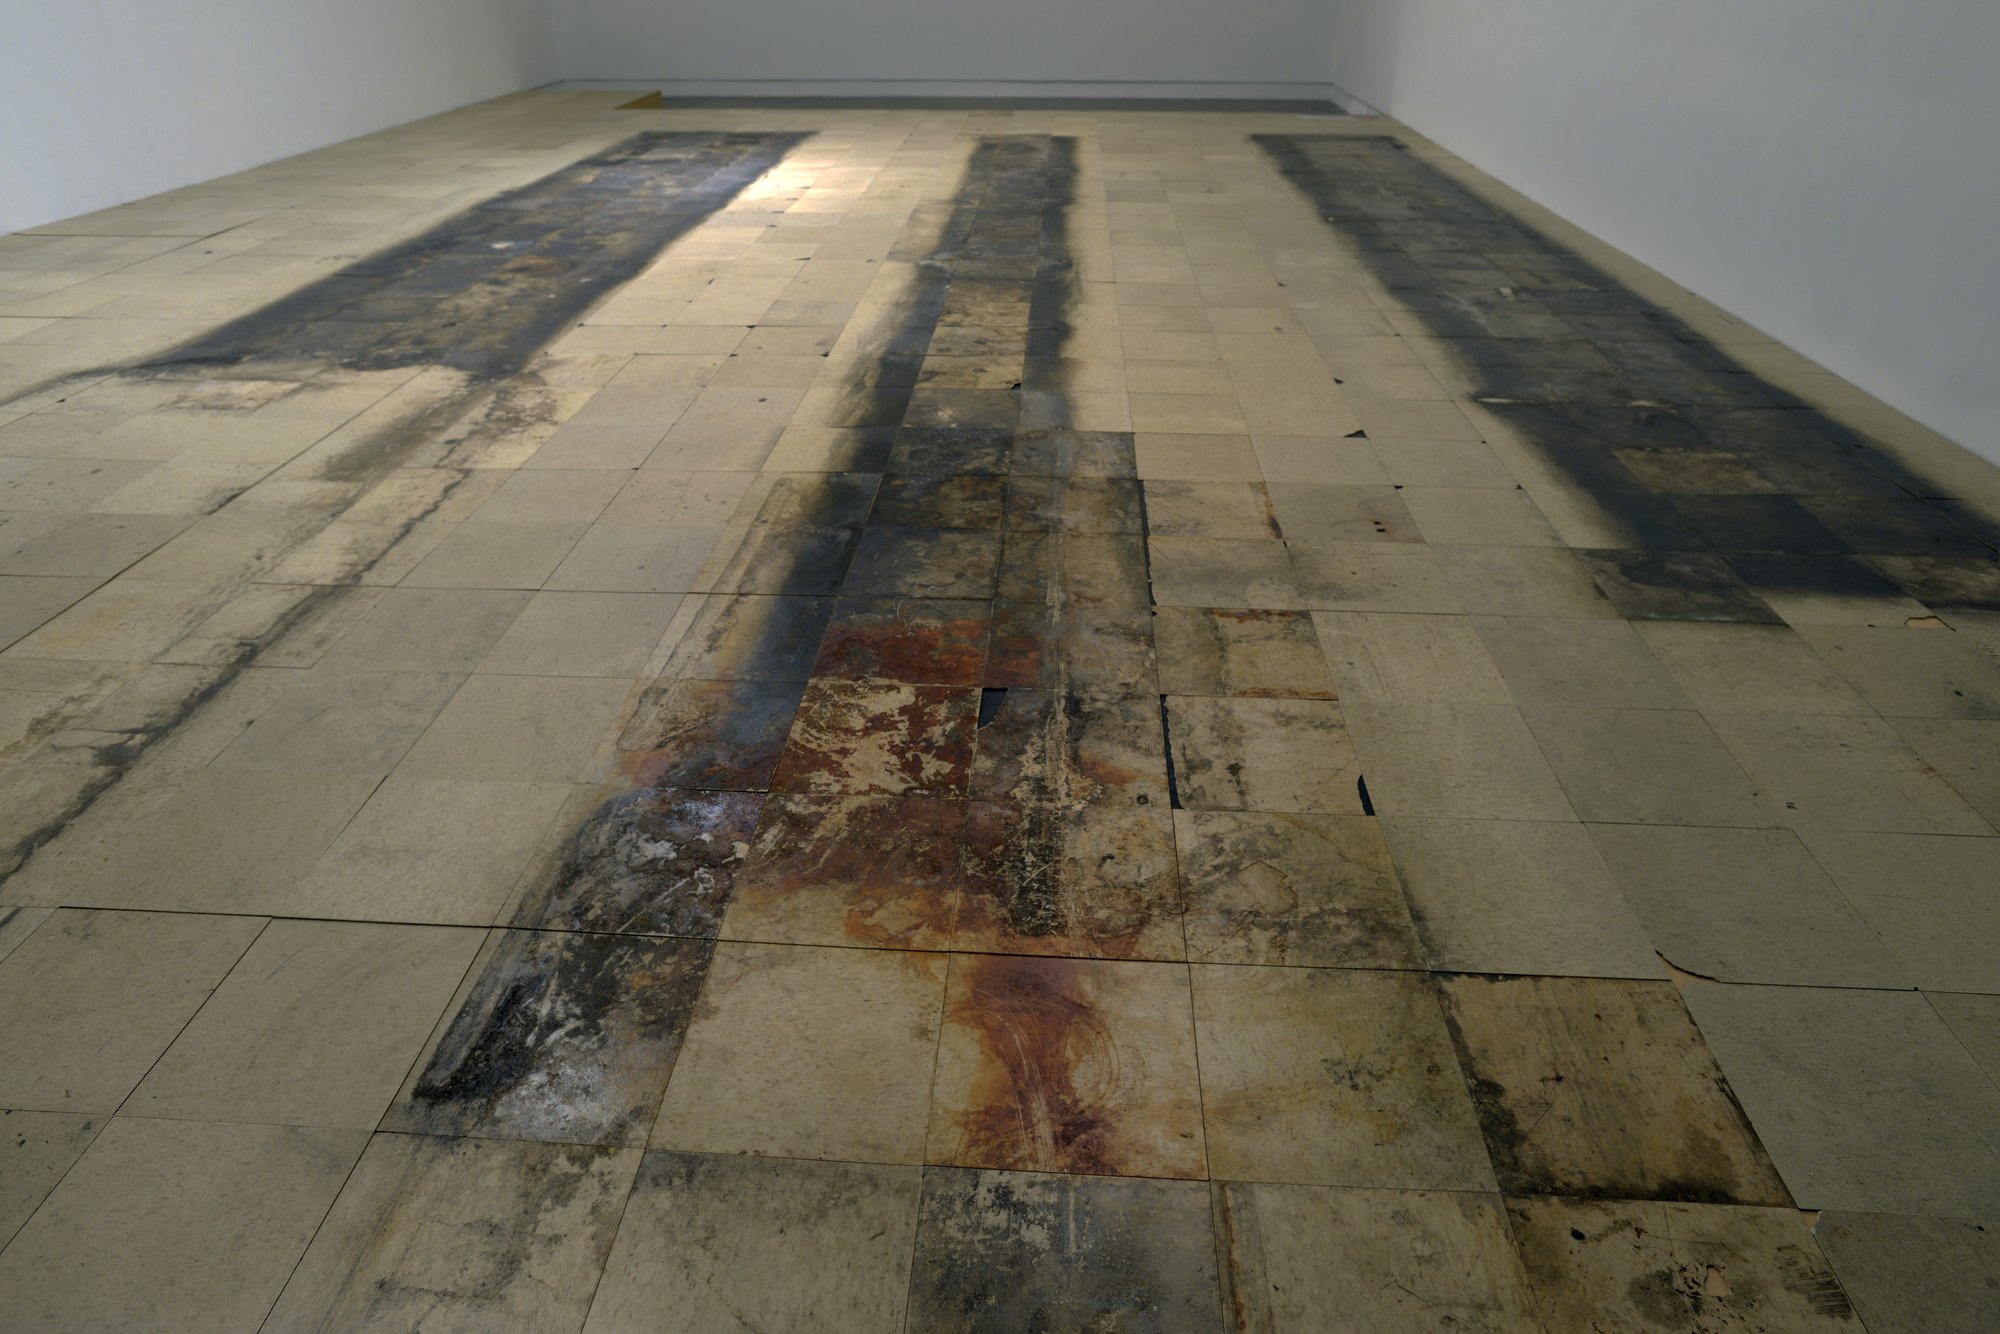 Shadi Habib Allah, 70 Days Behind Inventory, found VTC floor tiles from a Florida grocery store, matt clear coat, 800 x 900 cm (315 x 354 3/8 in), 2018. Installation view, Put to Rights, Renaissance Society, Chicago, 2018